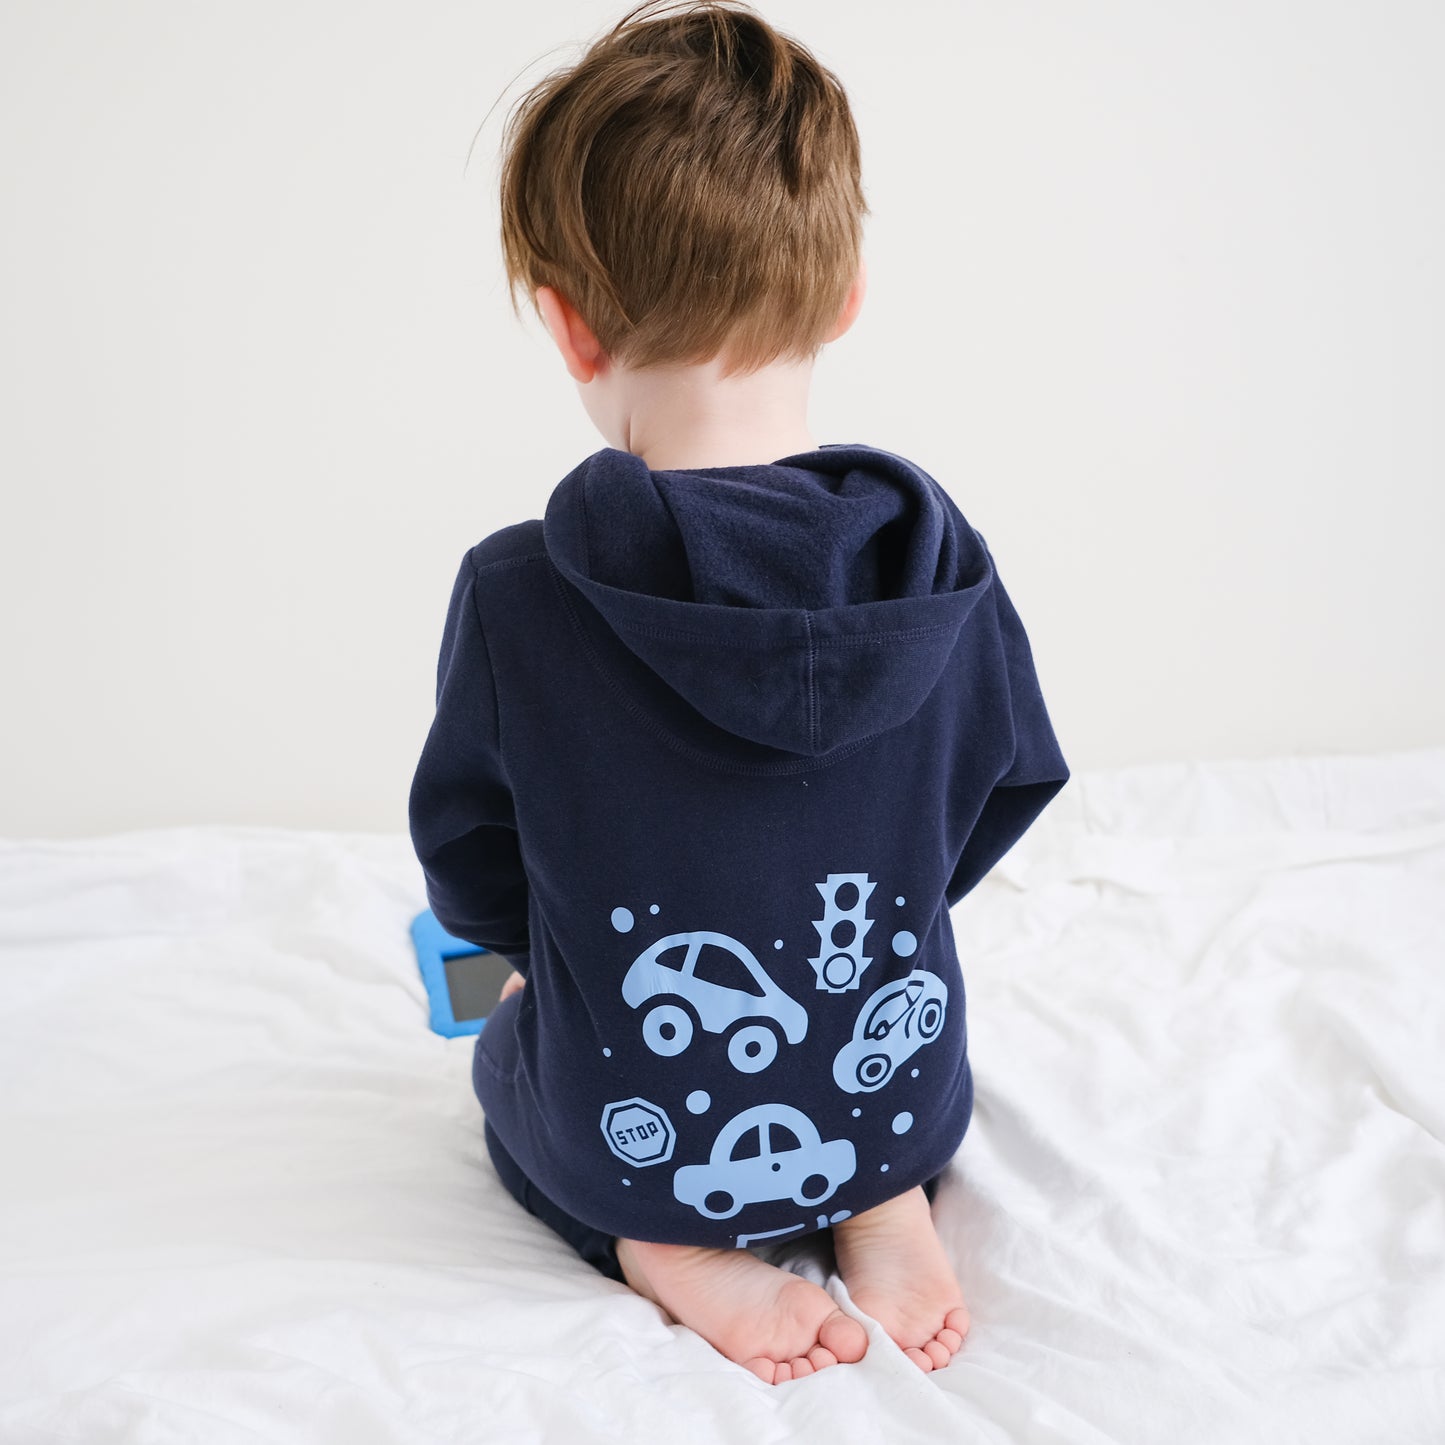 Car Personalised Onesie (Younger Sizes)